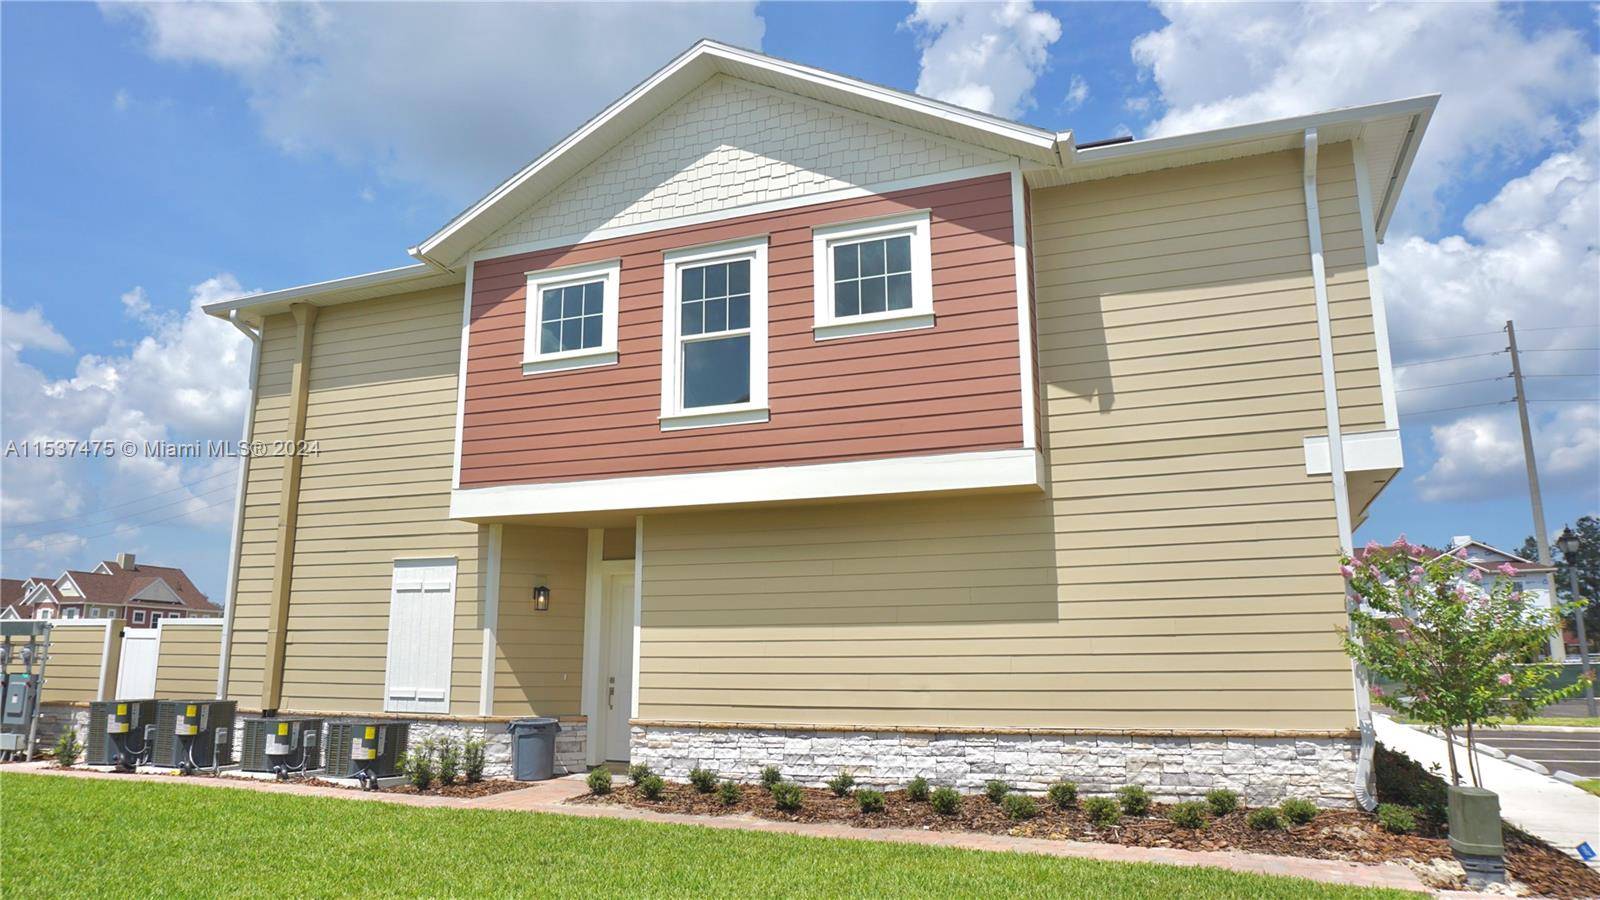 Awesome opportunity to acquire your investment property at the Summerville community, zoned for long and short term rentals, conveniently located on the west side of Irlo Bronson Memorial road, surrounded ...